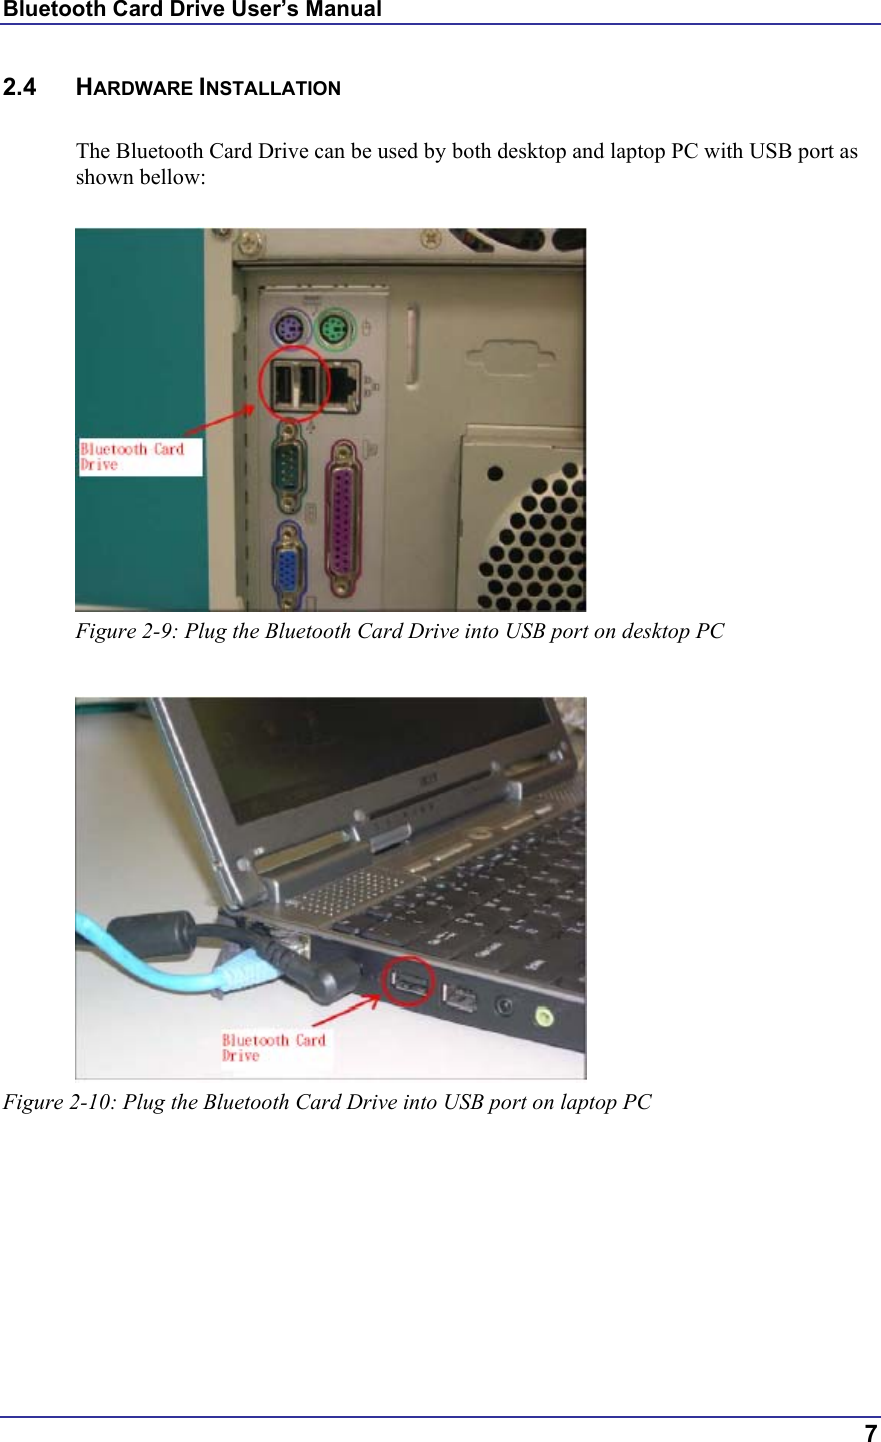 Bluetooth Card Drive User’s Manual  7 2.4 HARDWARE INSTALLATION  The Bluetooth Card Drive can be used by both desktop and laptop PC with USB port as shown bellow:   Figure 2-9: Plug the Bluetooth Card Drive into USB port on desktop PC    Figure 2-10: Plug the Bluetooth Card Drive into USB port on laptop PC 